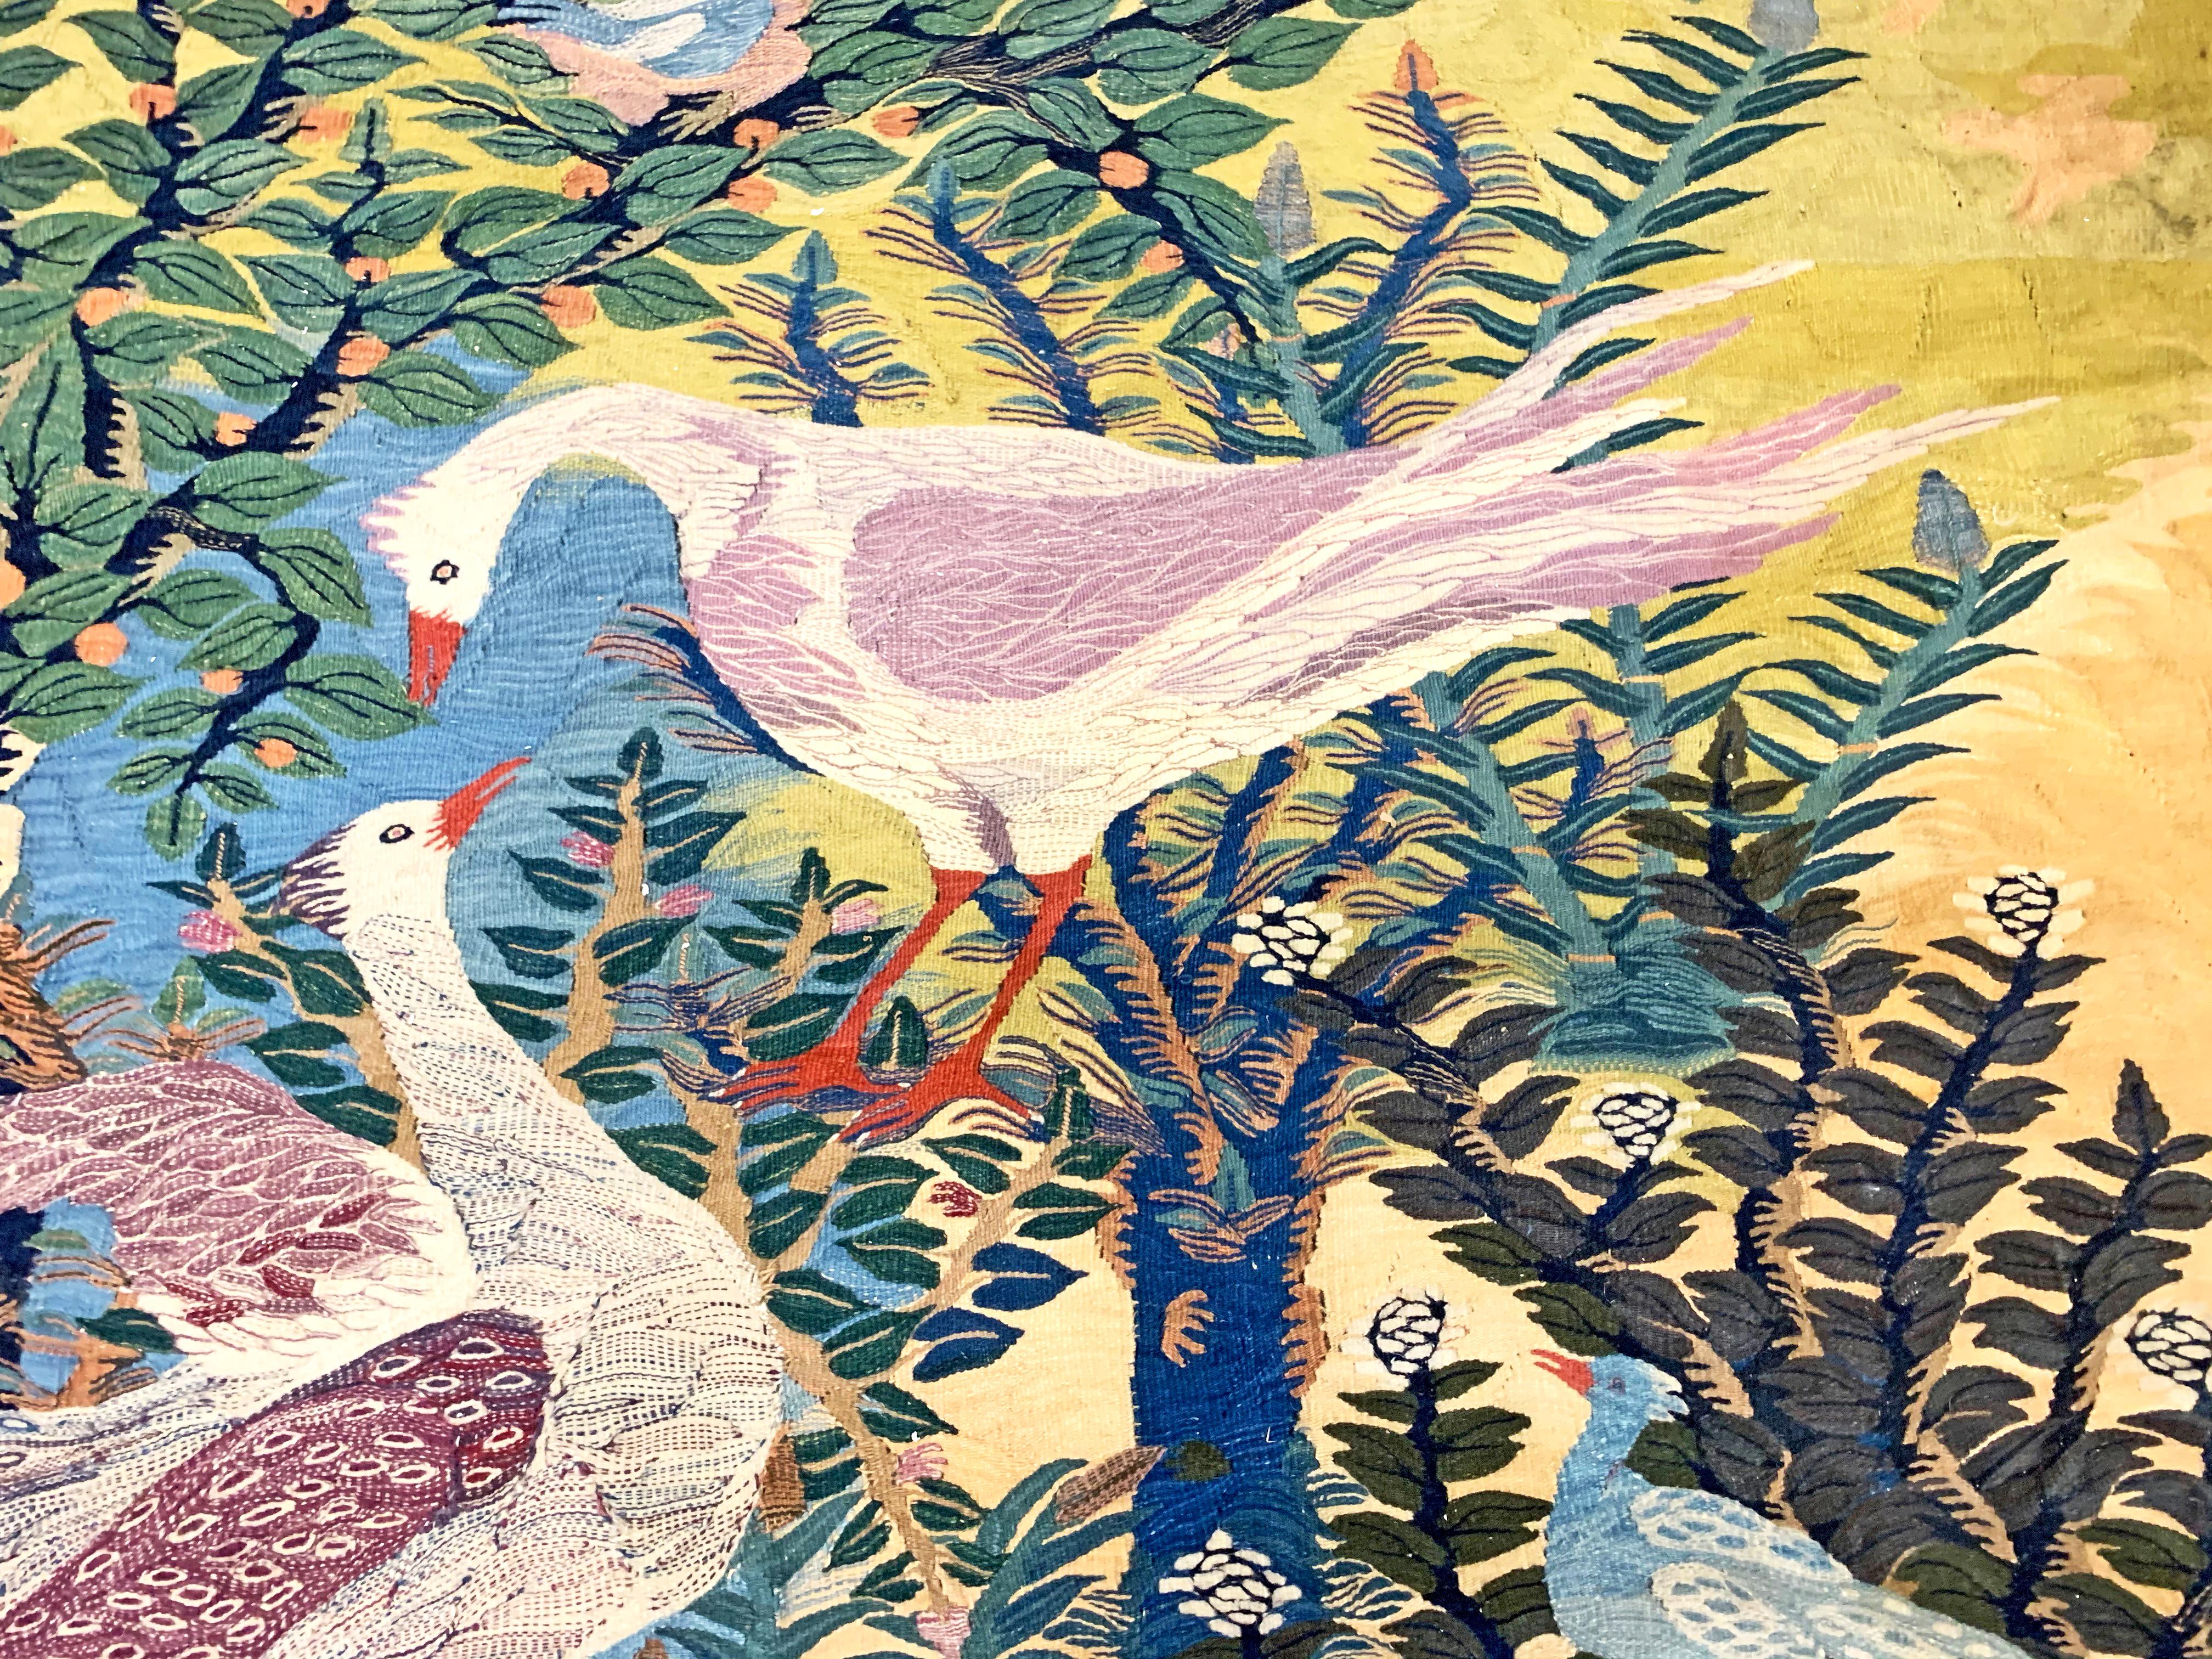 Dating from 1976, about 20 years after Ramses Wissa Wassef established his tapestry workshop in the 1950s, this monumental tapestry by Samina Ahmed, one of his early students, is dominated by the famed 